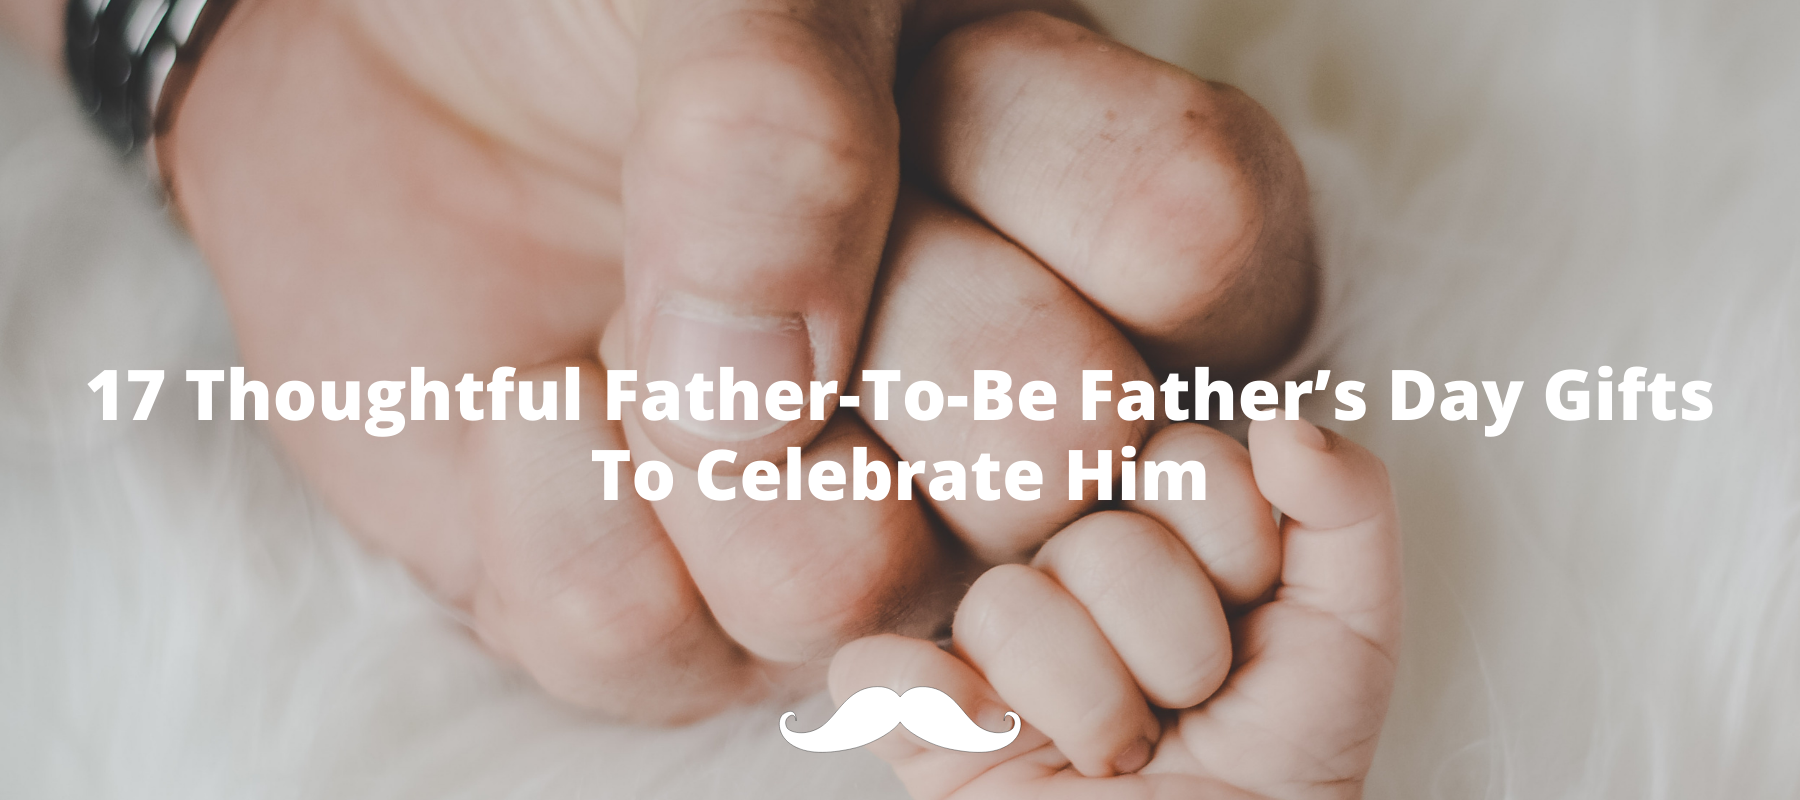 Find the Fabulous Happy Father's Day Gifts Online